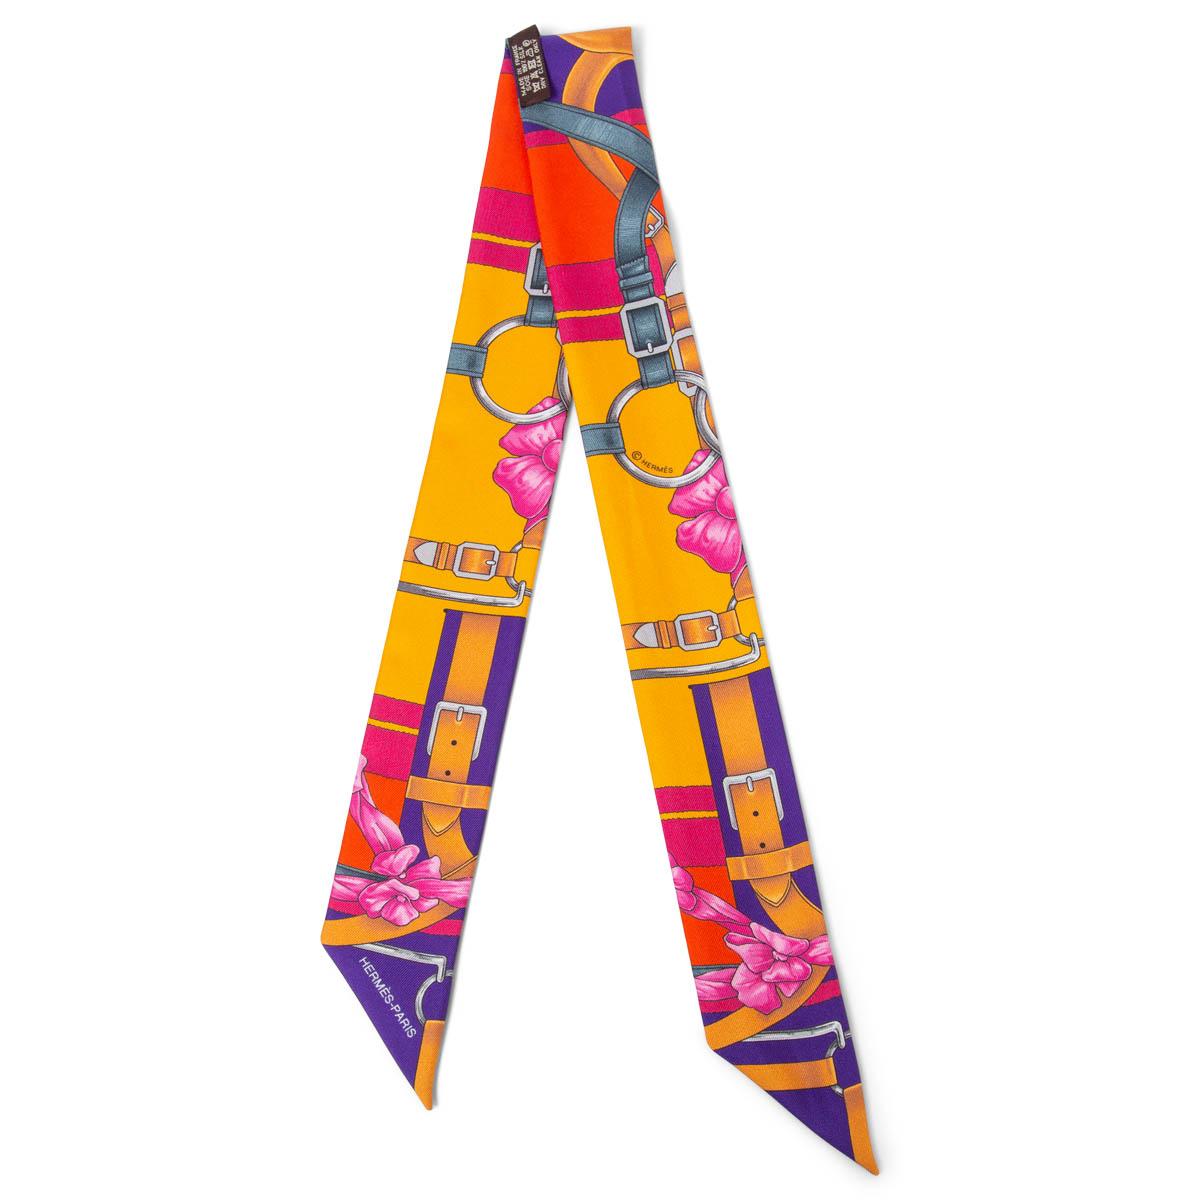 100% authentic Hermès Grand Manege Fleuri Twilly scarf in orange, red, purple, pink and petrol silk (100%). Has been worn and is in excellent condition. 

Measurements
Width	5cm (2in)
Length	86cm (33.5in)

All our listings include only the listed